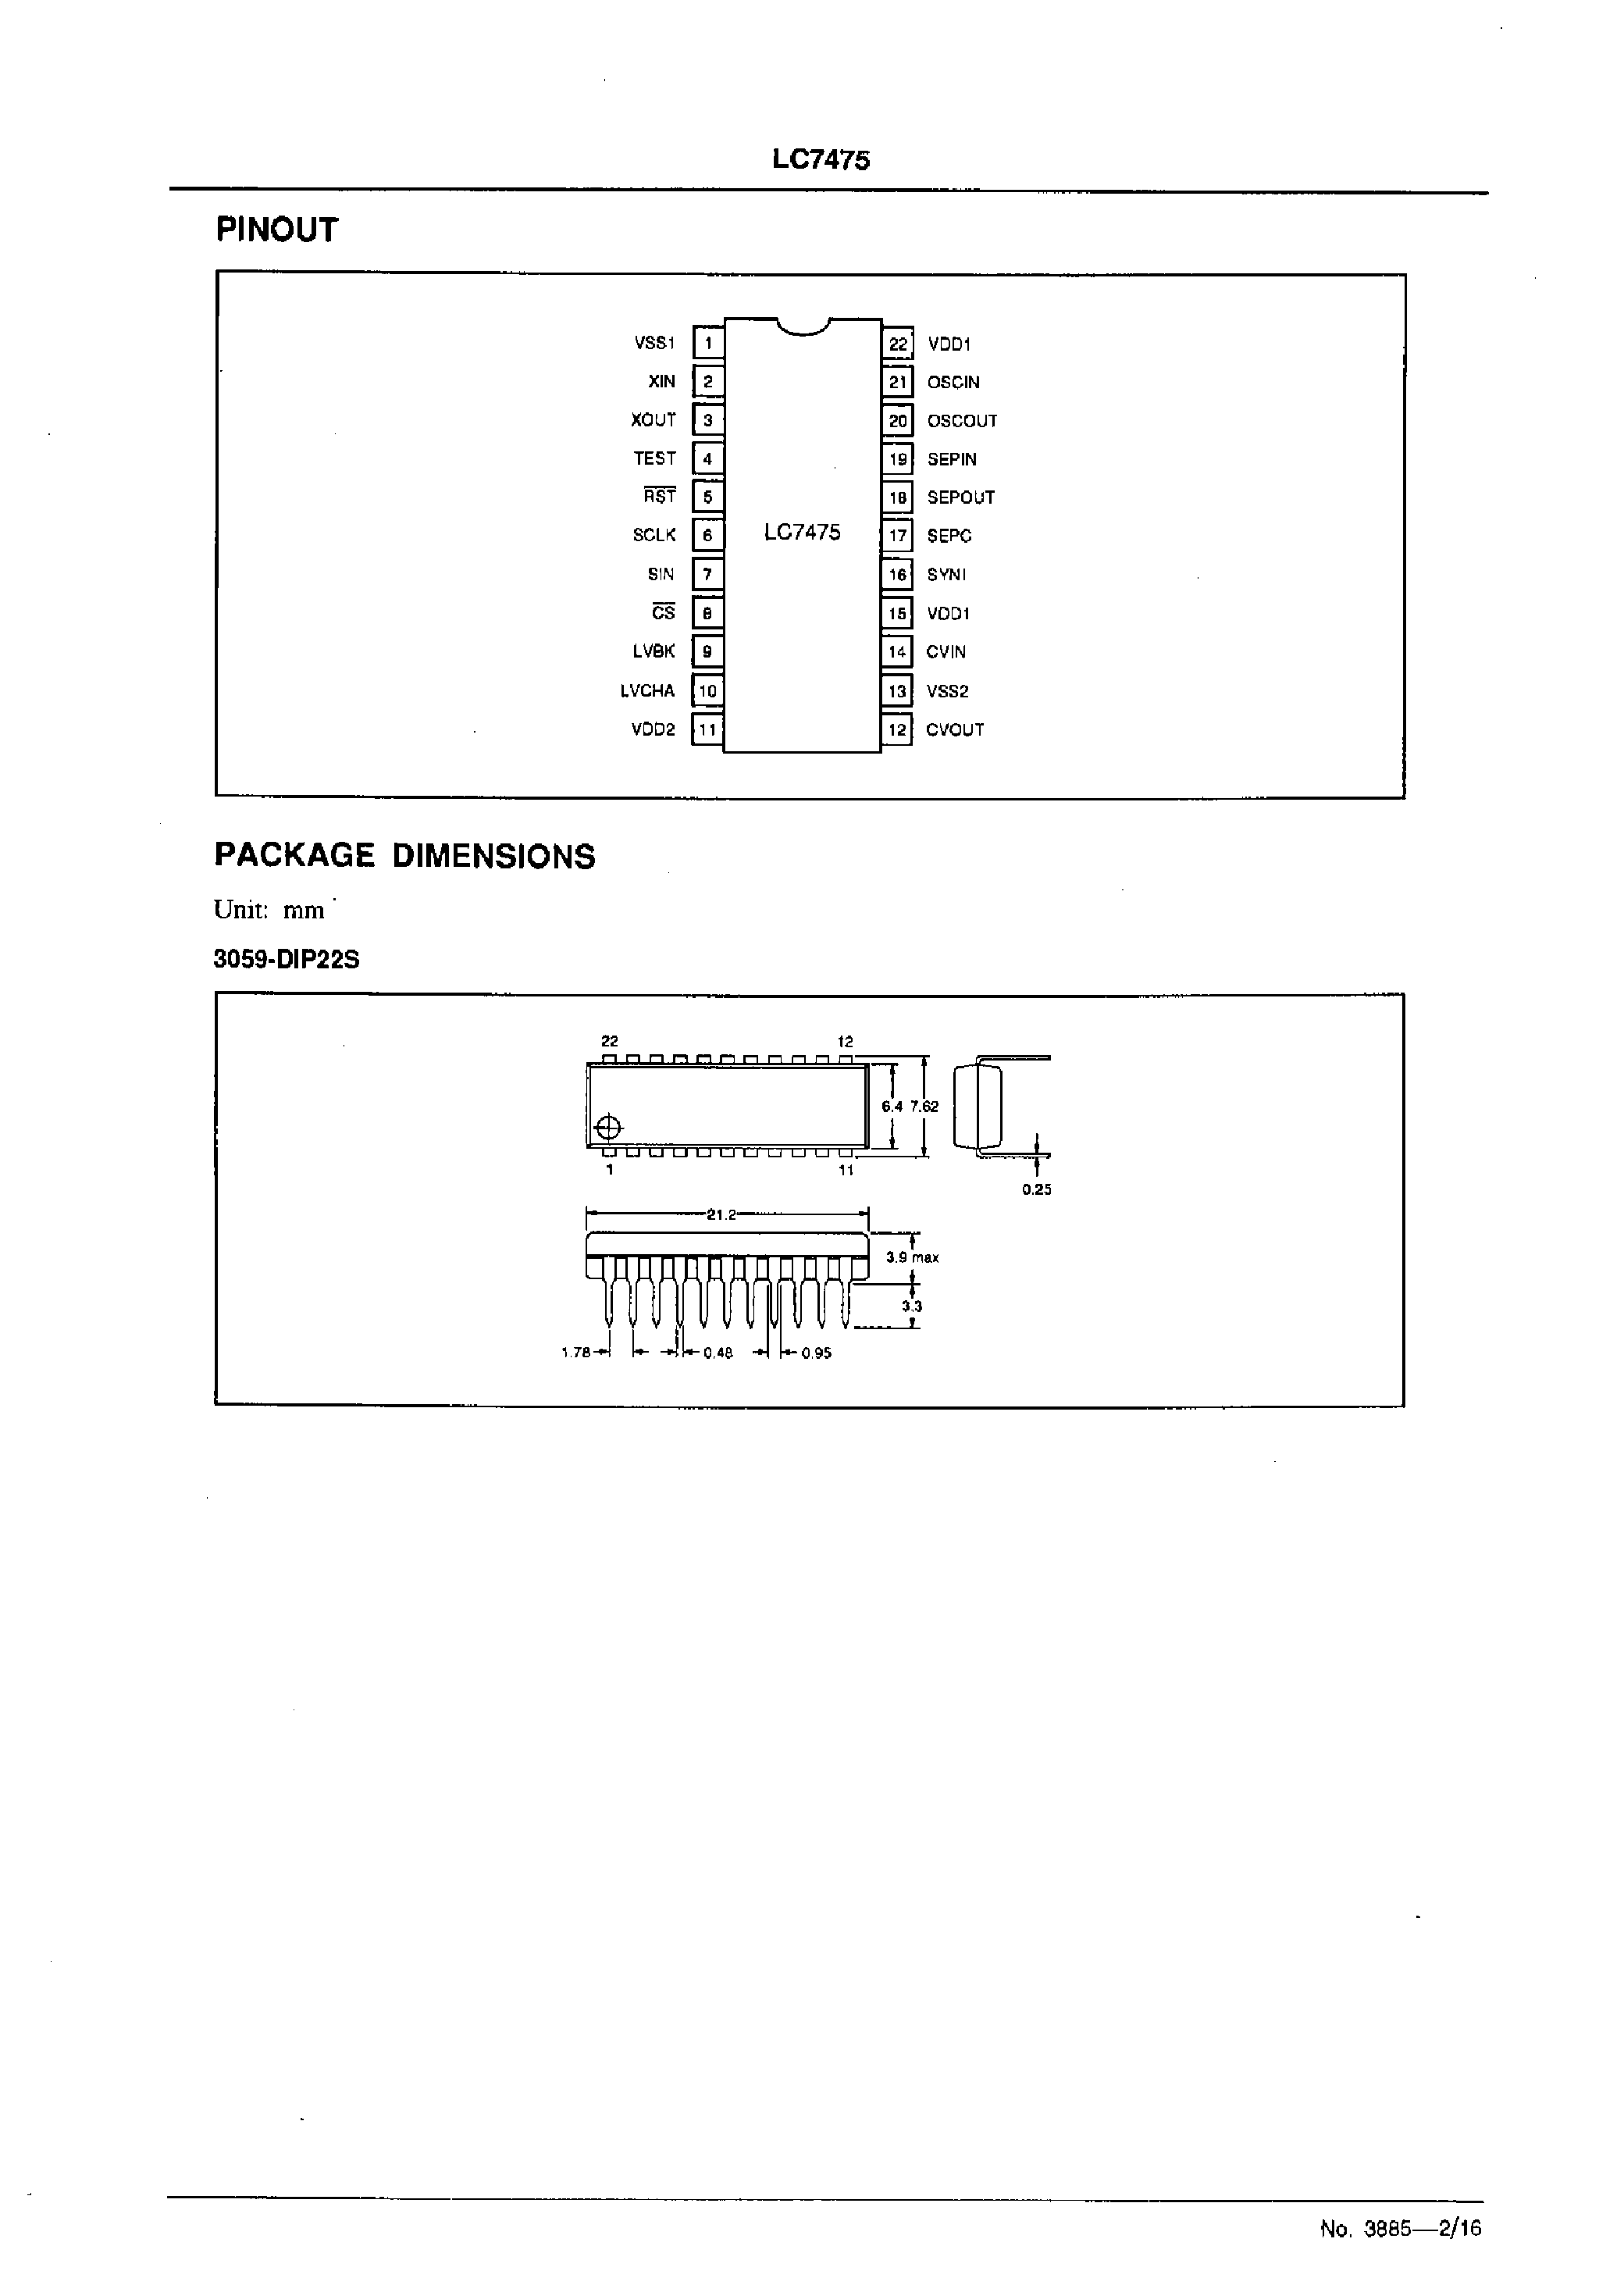 Datasheet 7475 - On-screen Display Controller for PAL-format Video page 2